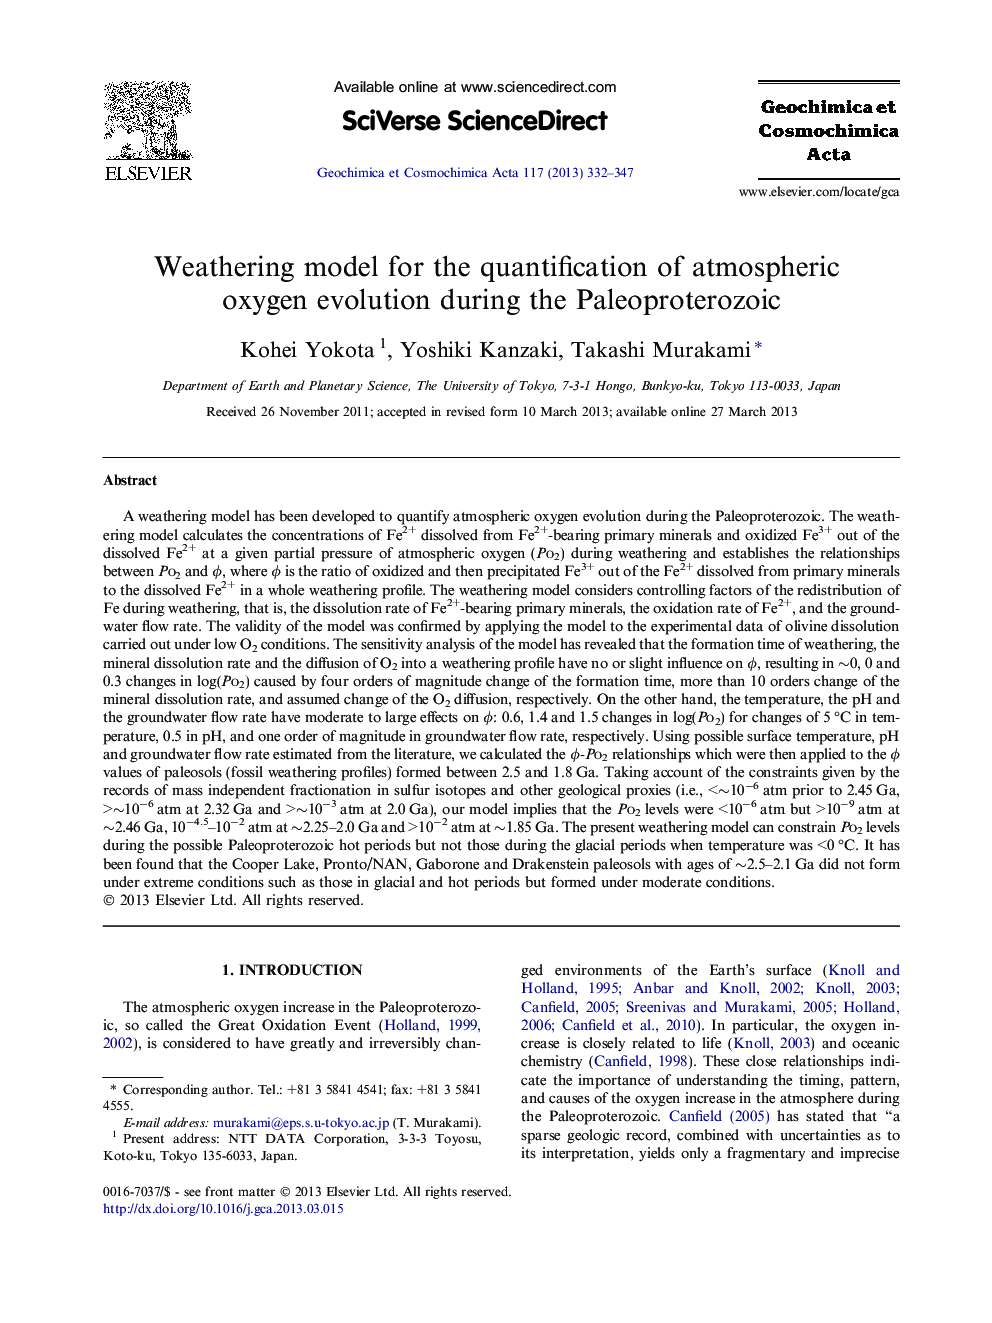 Weathering model for the quantification of atmospheric oxygen evolution during the Paleoproterozoic